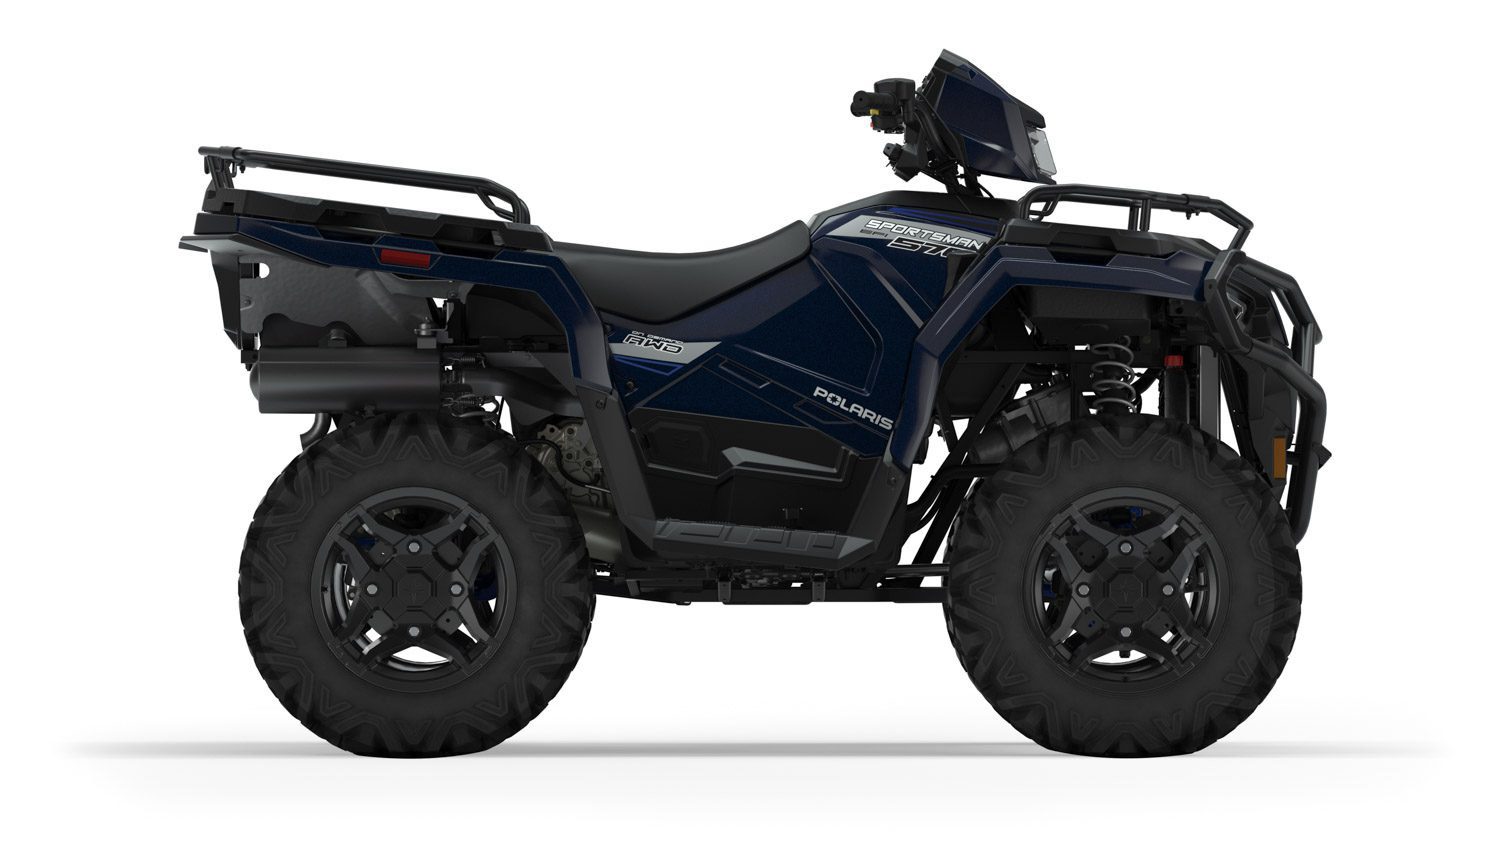 Polaris New Additions & Enhancements Across Entire Lineup